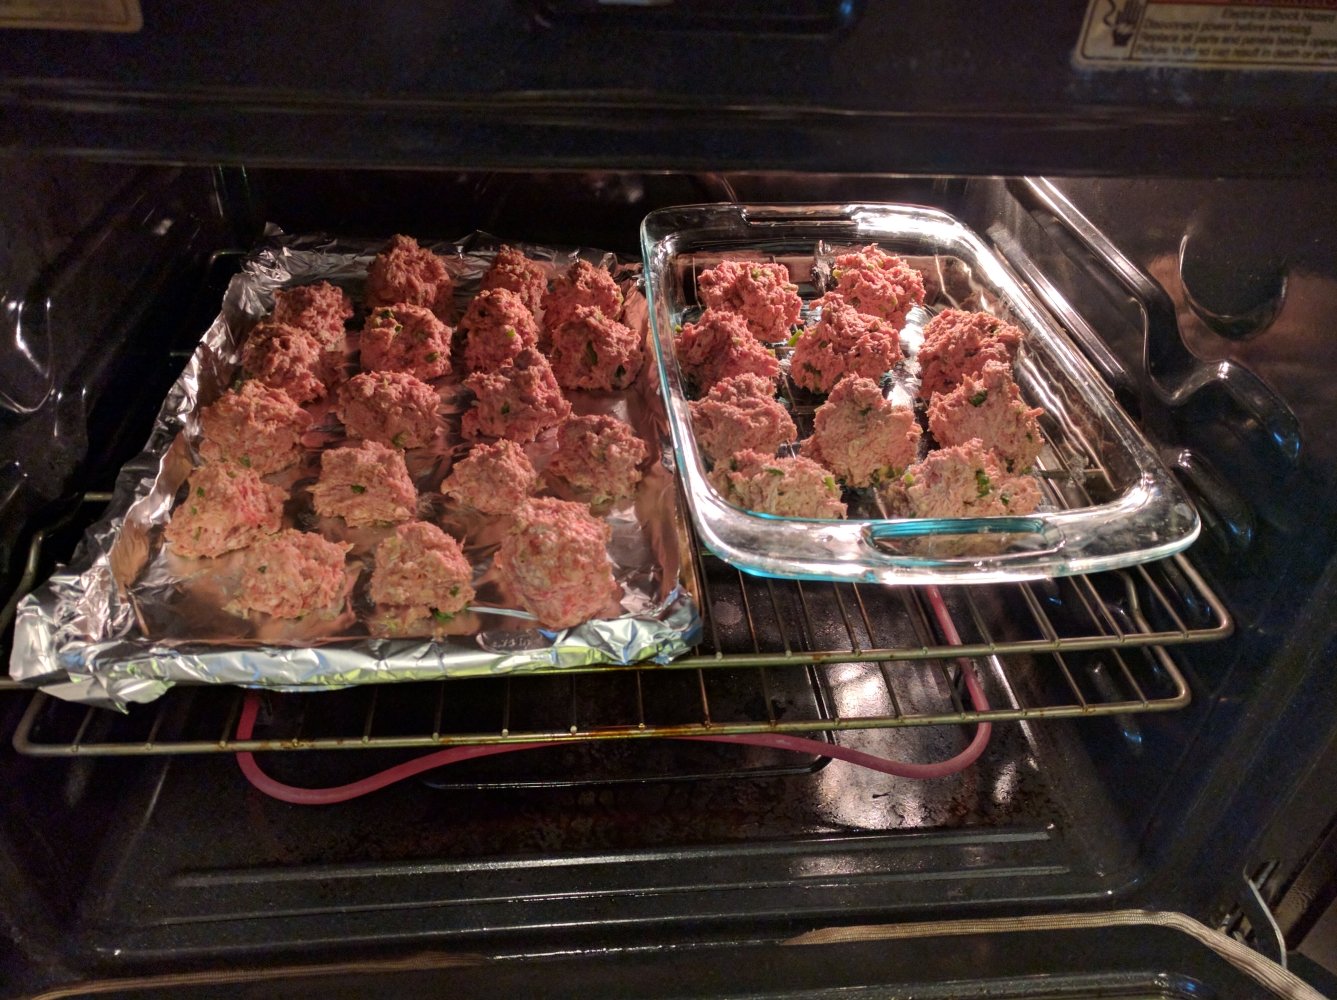 meatballs in the oven